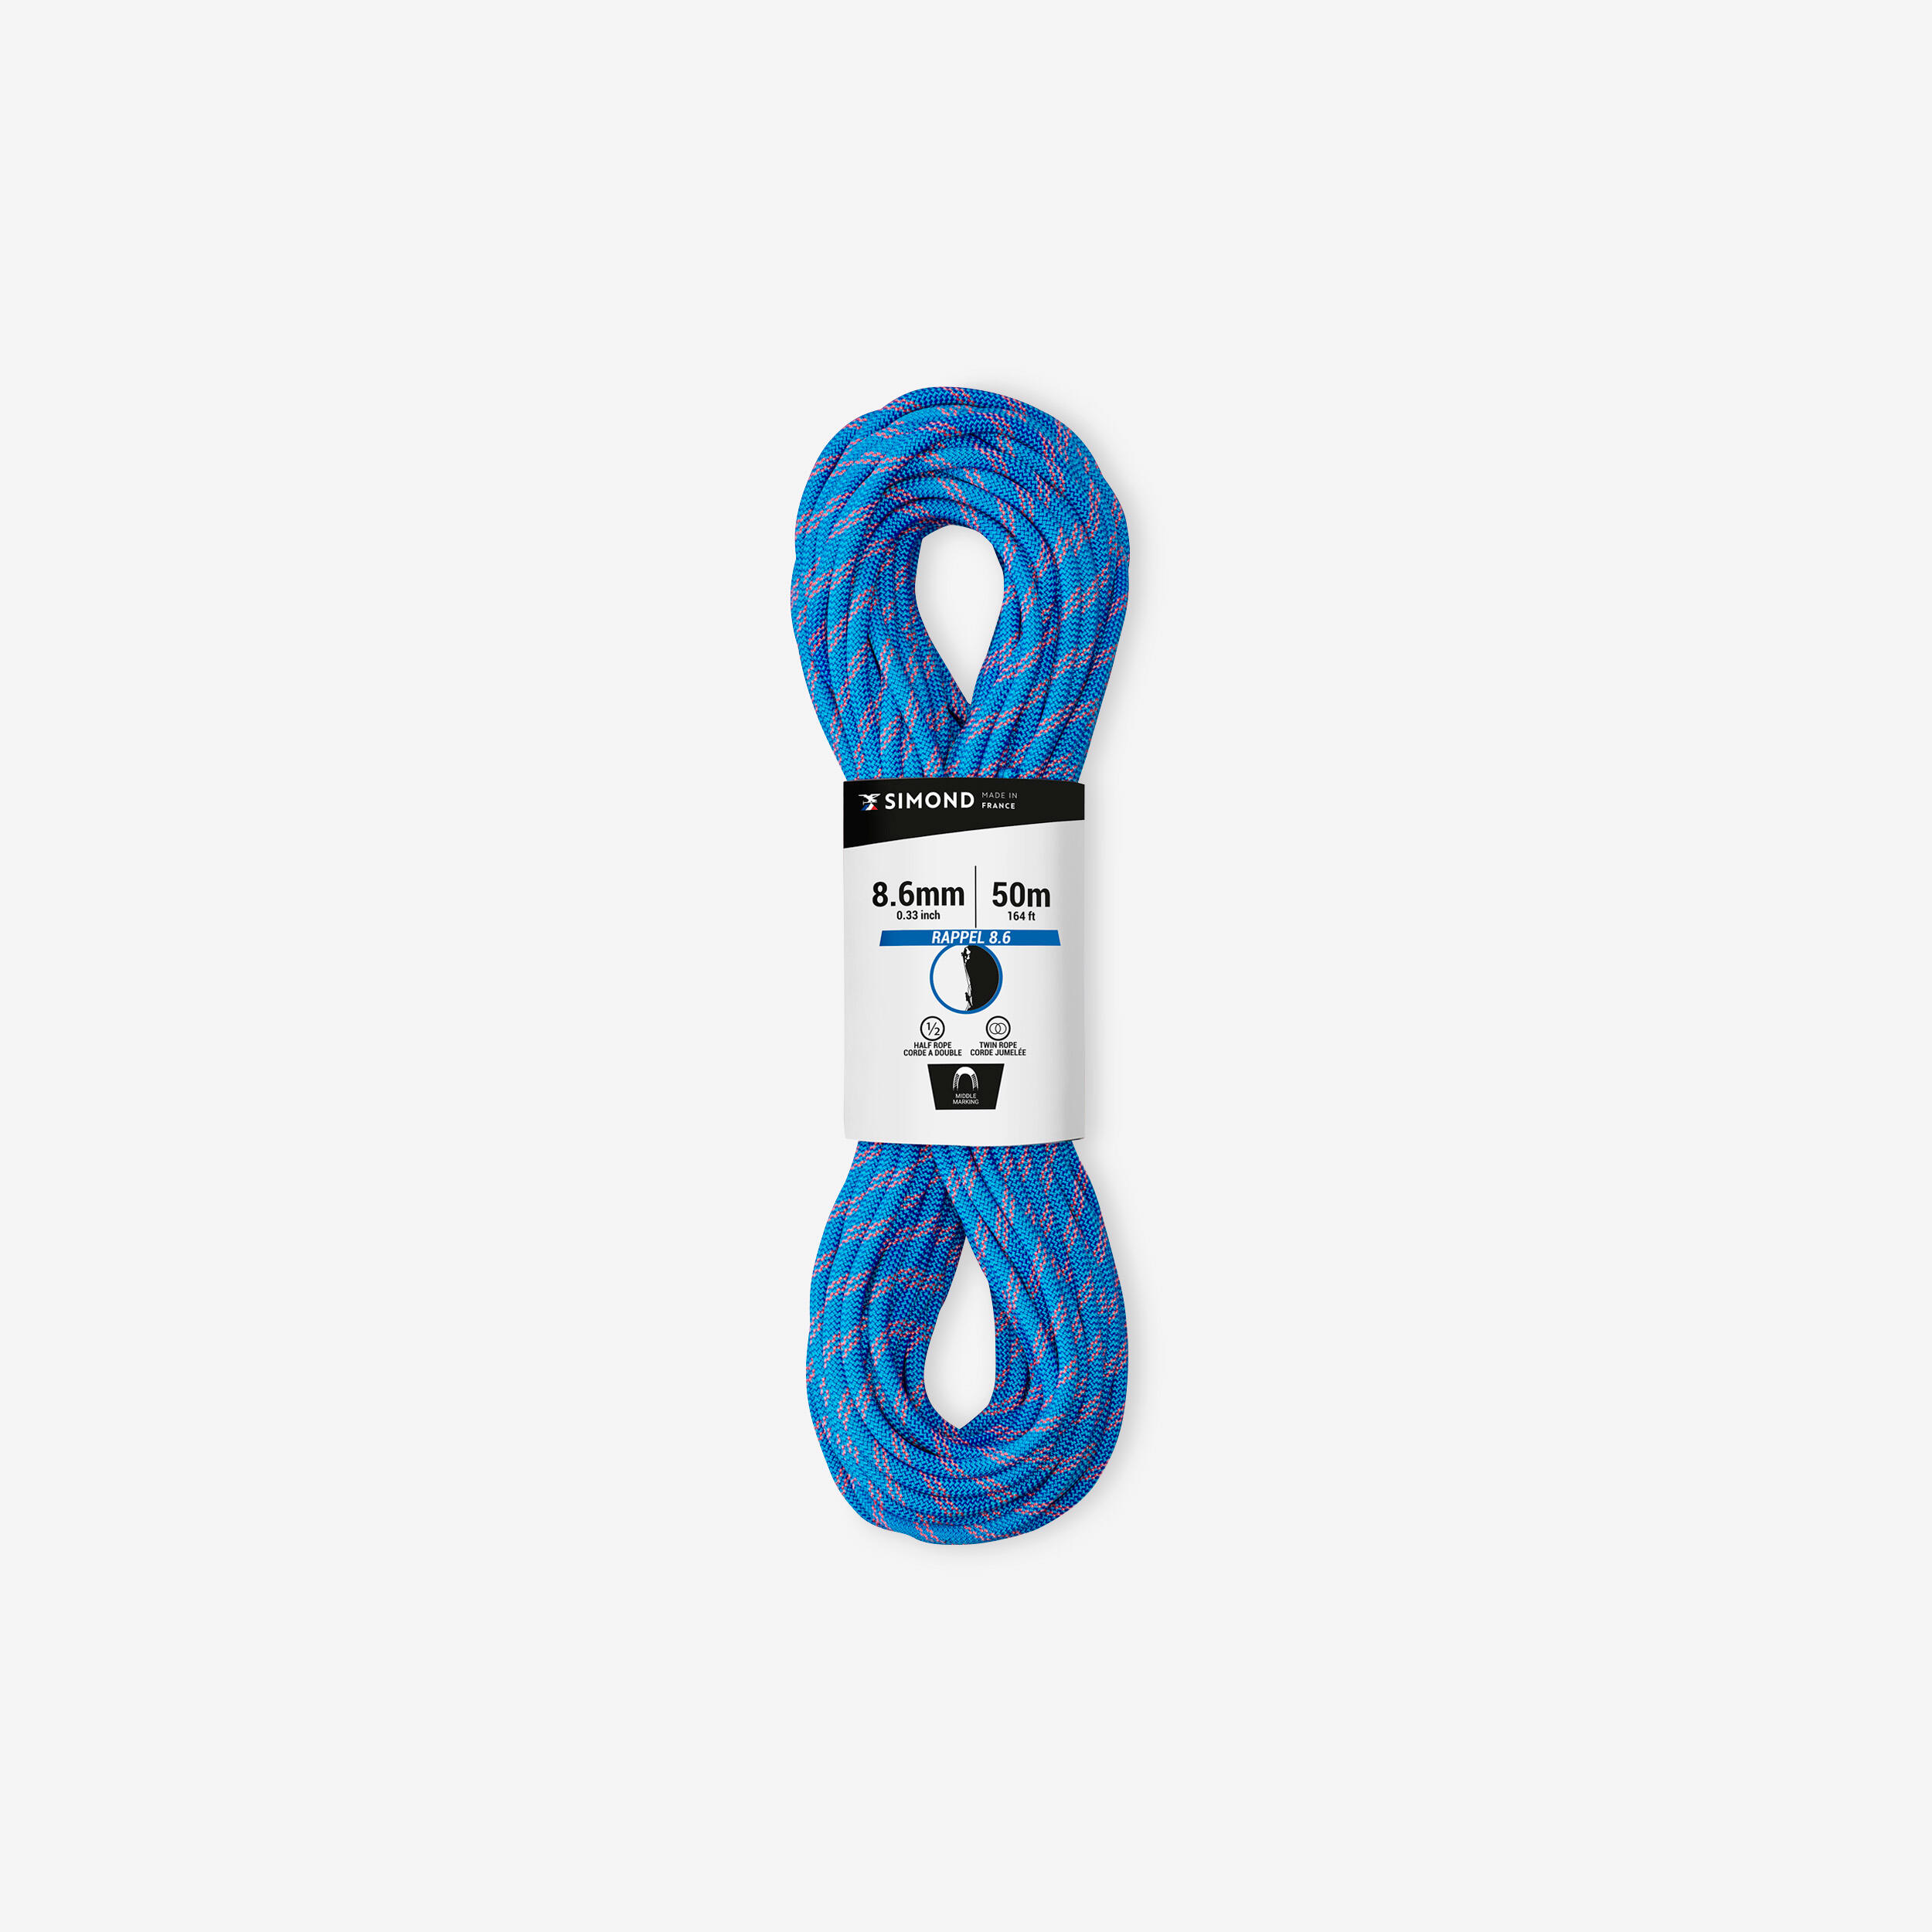 Climbing and mountaineering half rope 8.6 mm x 50 m - RAPPEL 8.6 Blue 1/6